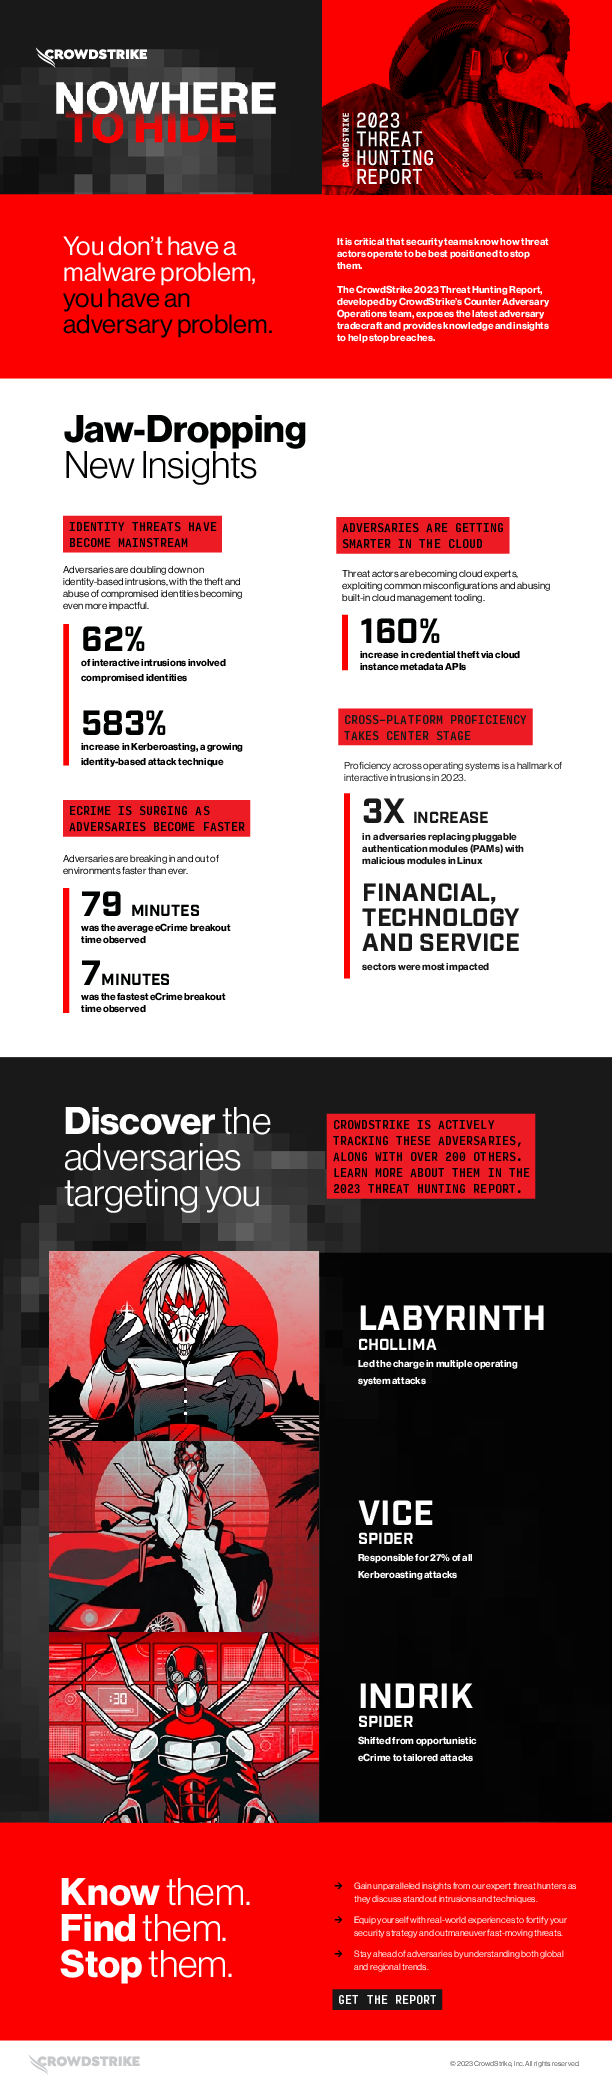 Nowhere to Hide: CrowdStrike 2023 Threat Hunting Report 